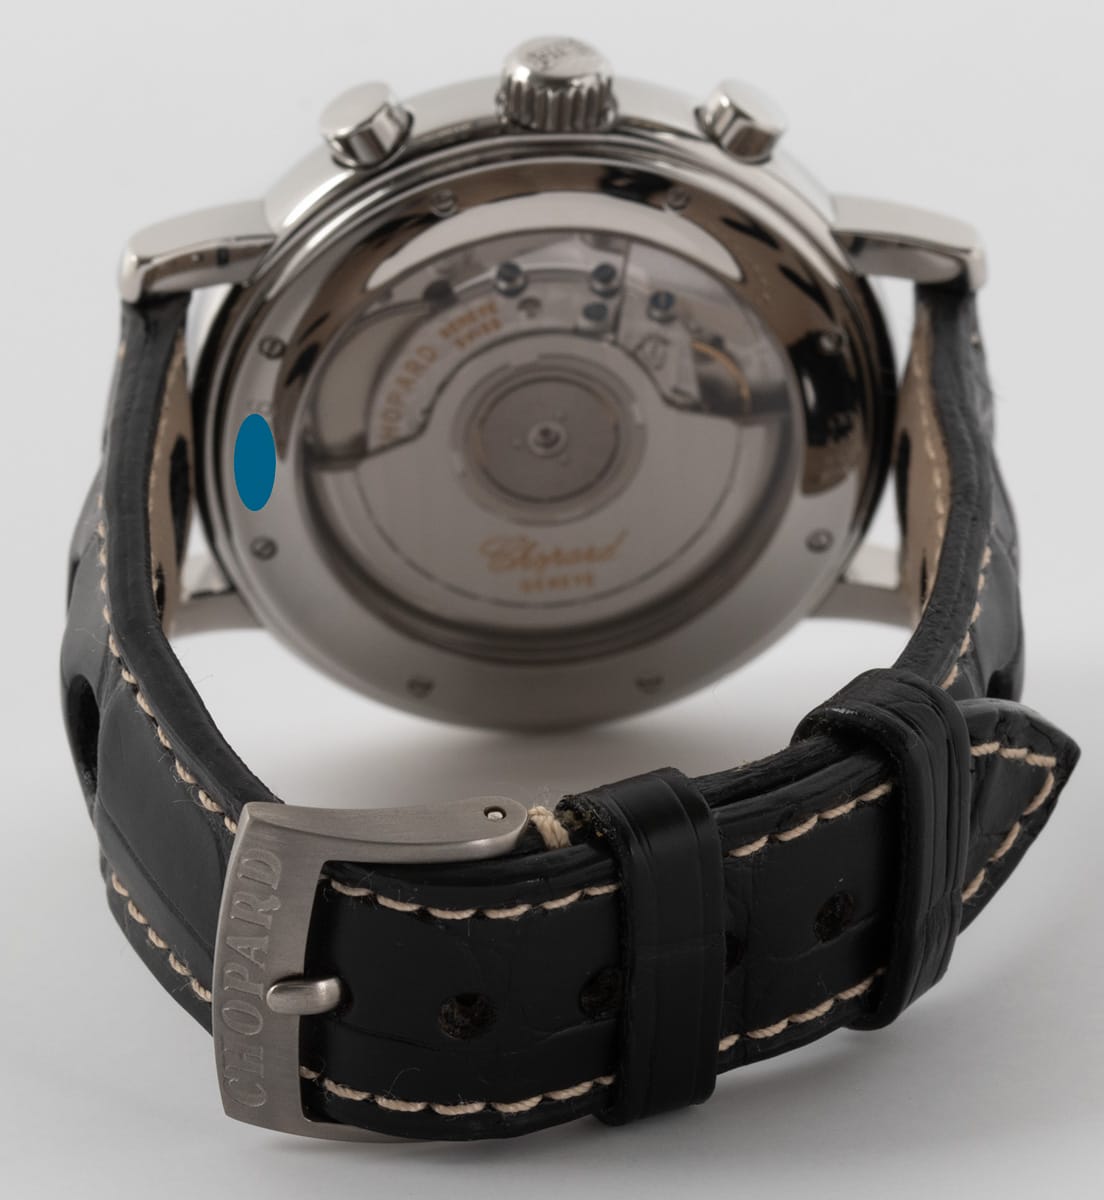 Rear / Band View of Mille Miglia Chronograph